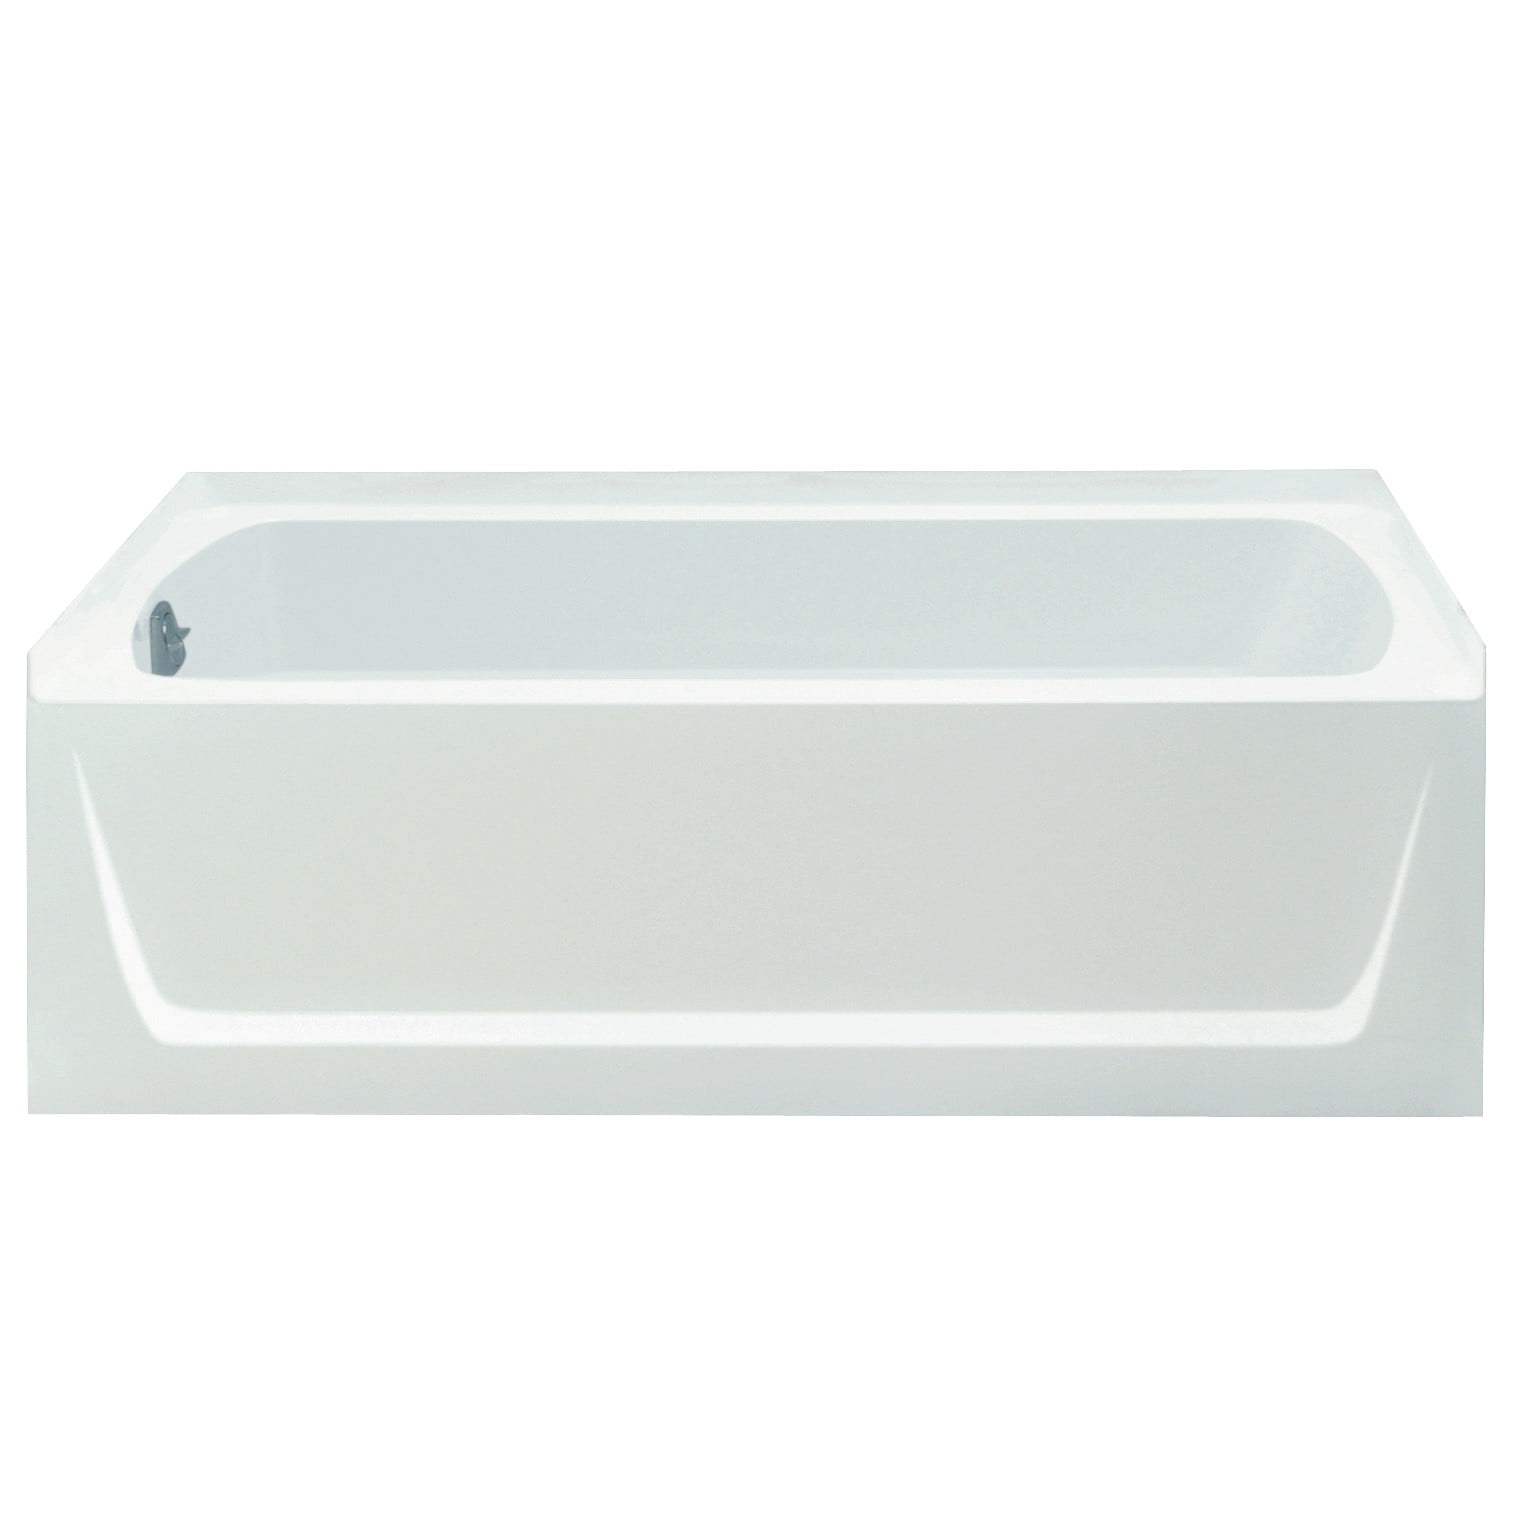 STERLING STORE+ 5 ft. Left-Hand Drain Rectangular Alcove Bathtub with Wall  Set and 10-Piece Accessory Set in White 71171710-0-10 - The Home Depot